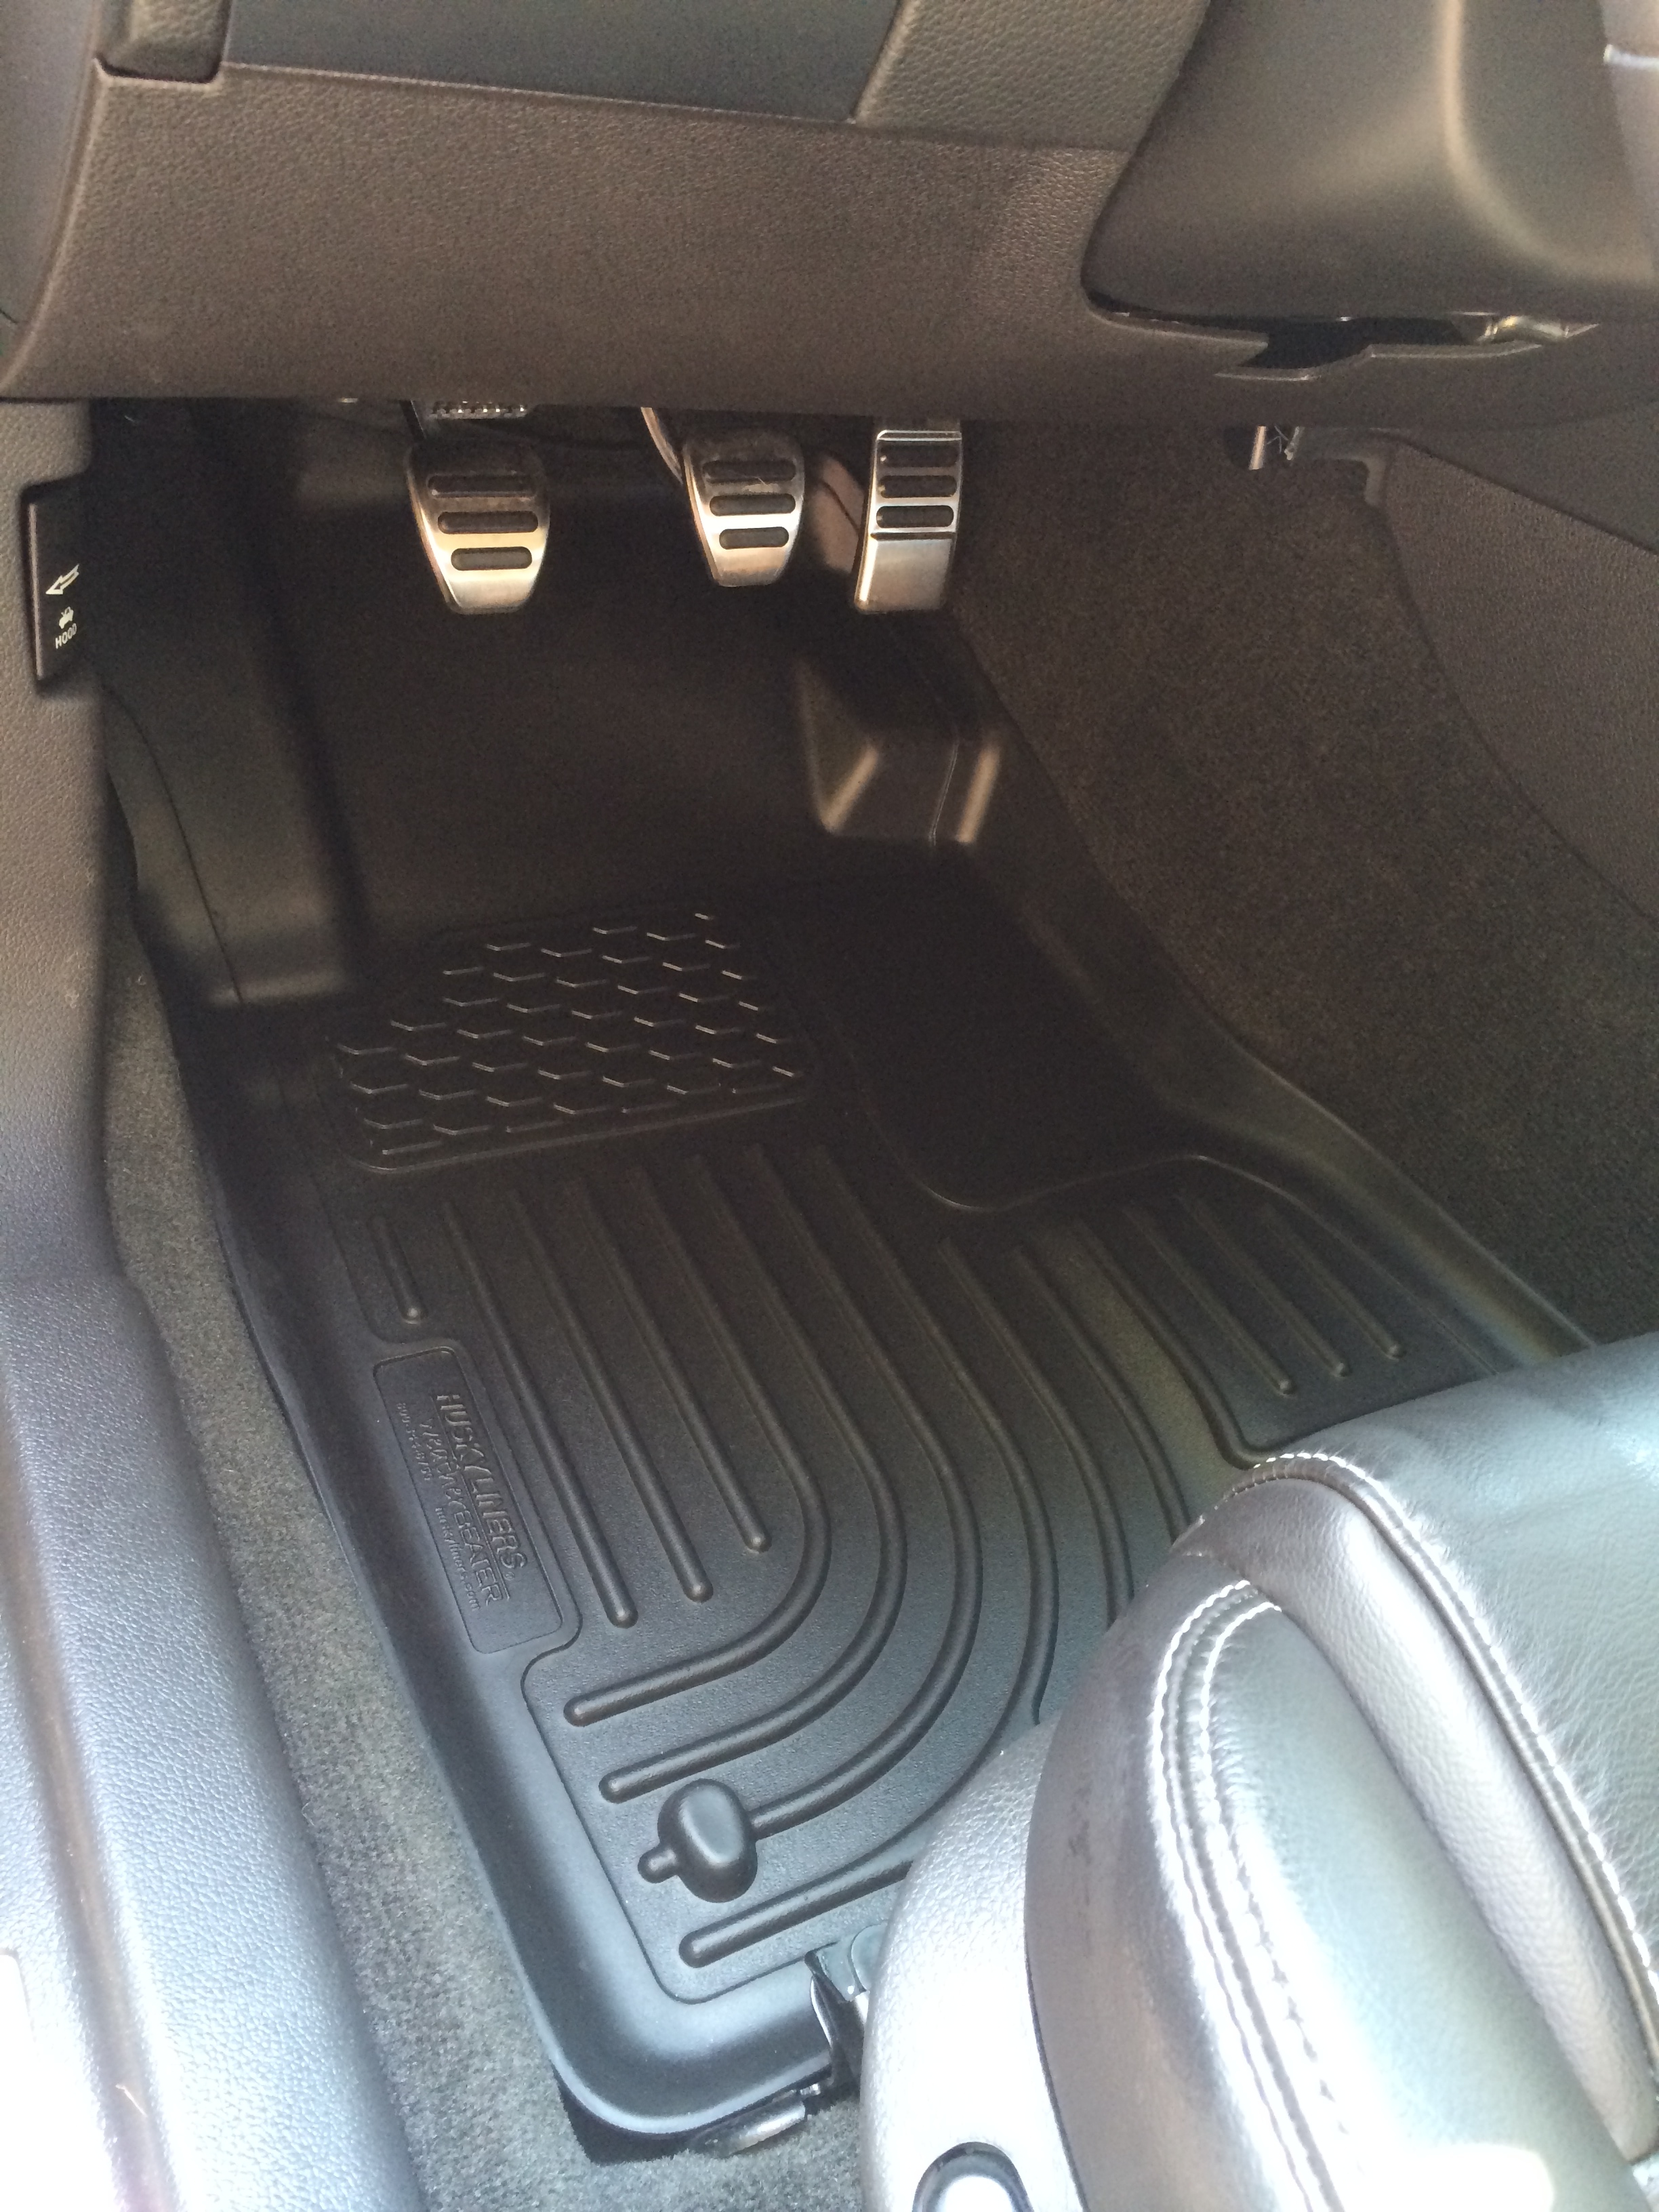 Husky Vs Weathertech The Mustang Source Ford Mustang Forums